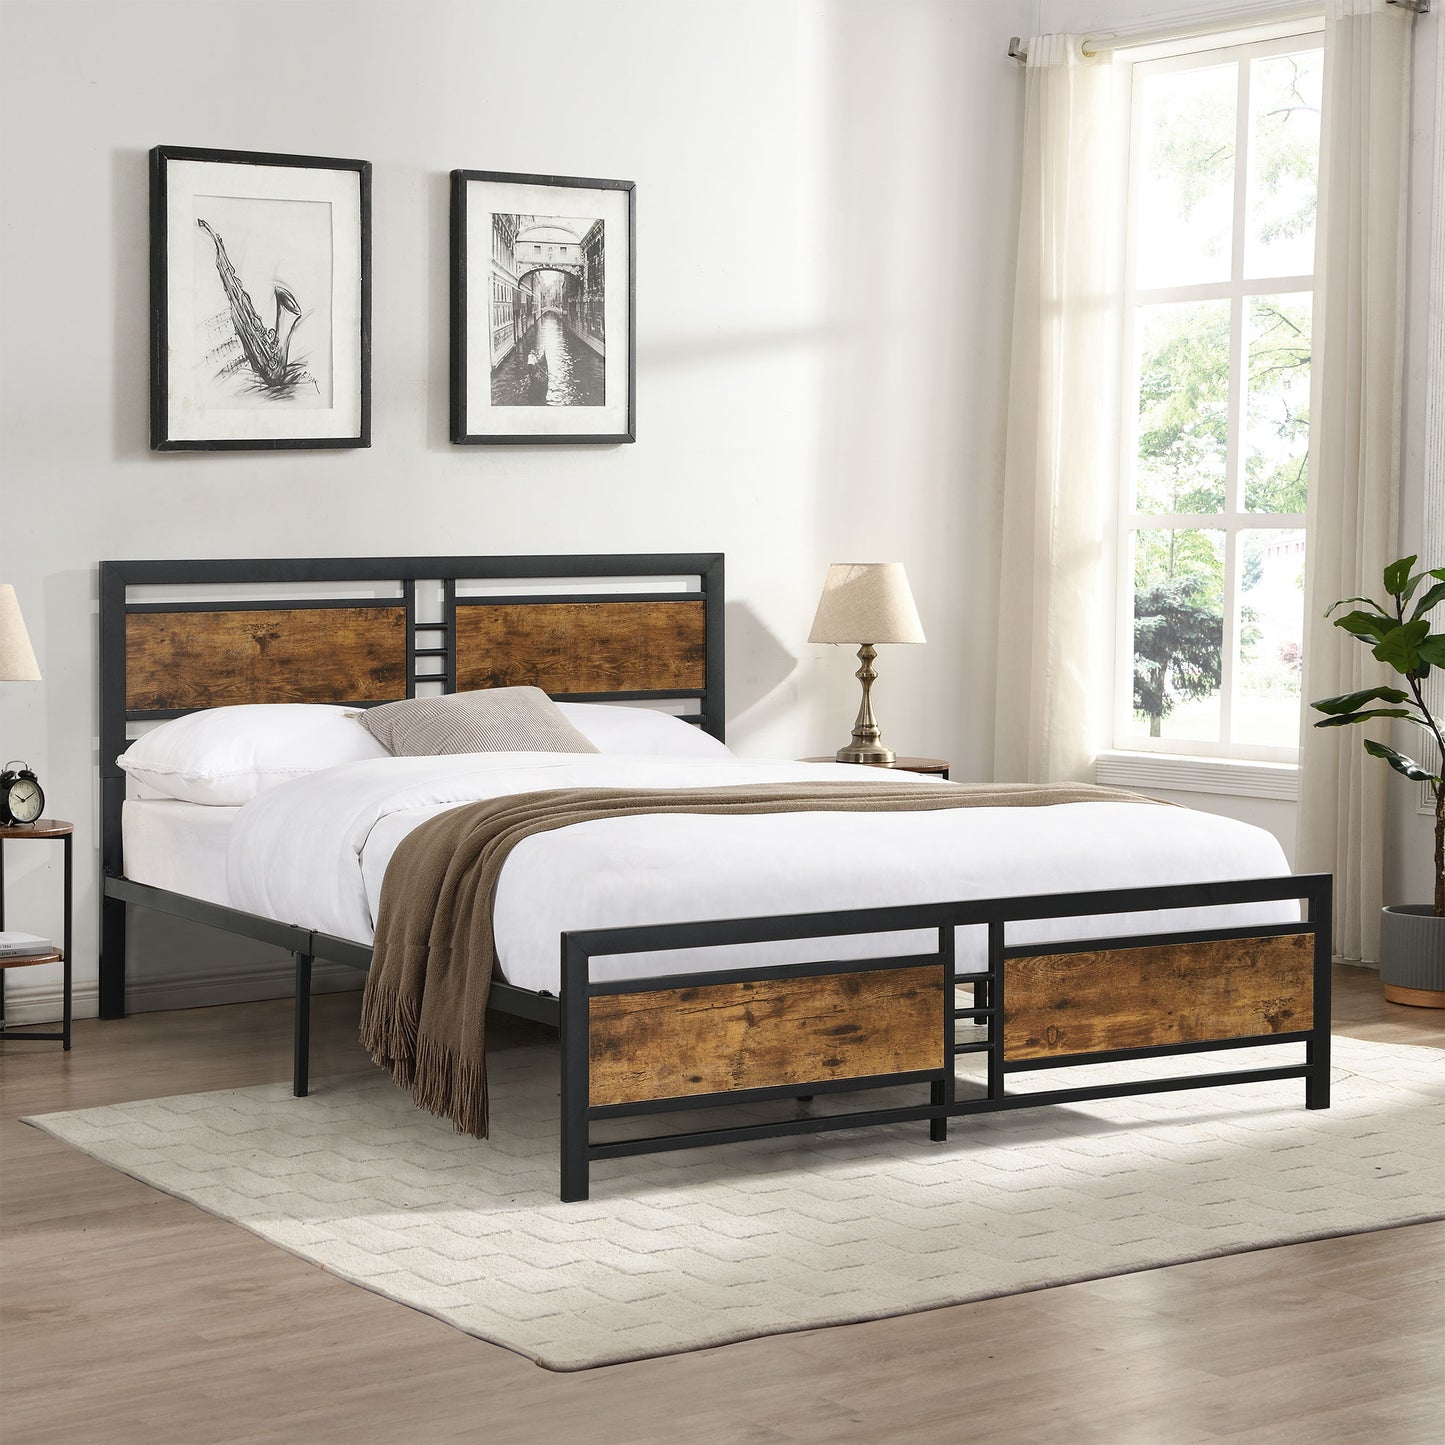 SYNGAR Rustic Brown Iron Platform Bed Frame Queen Size with Vintage Headboard and Footboard, Industrial Metal Queen Bed Frame with Strong Slat Support